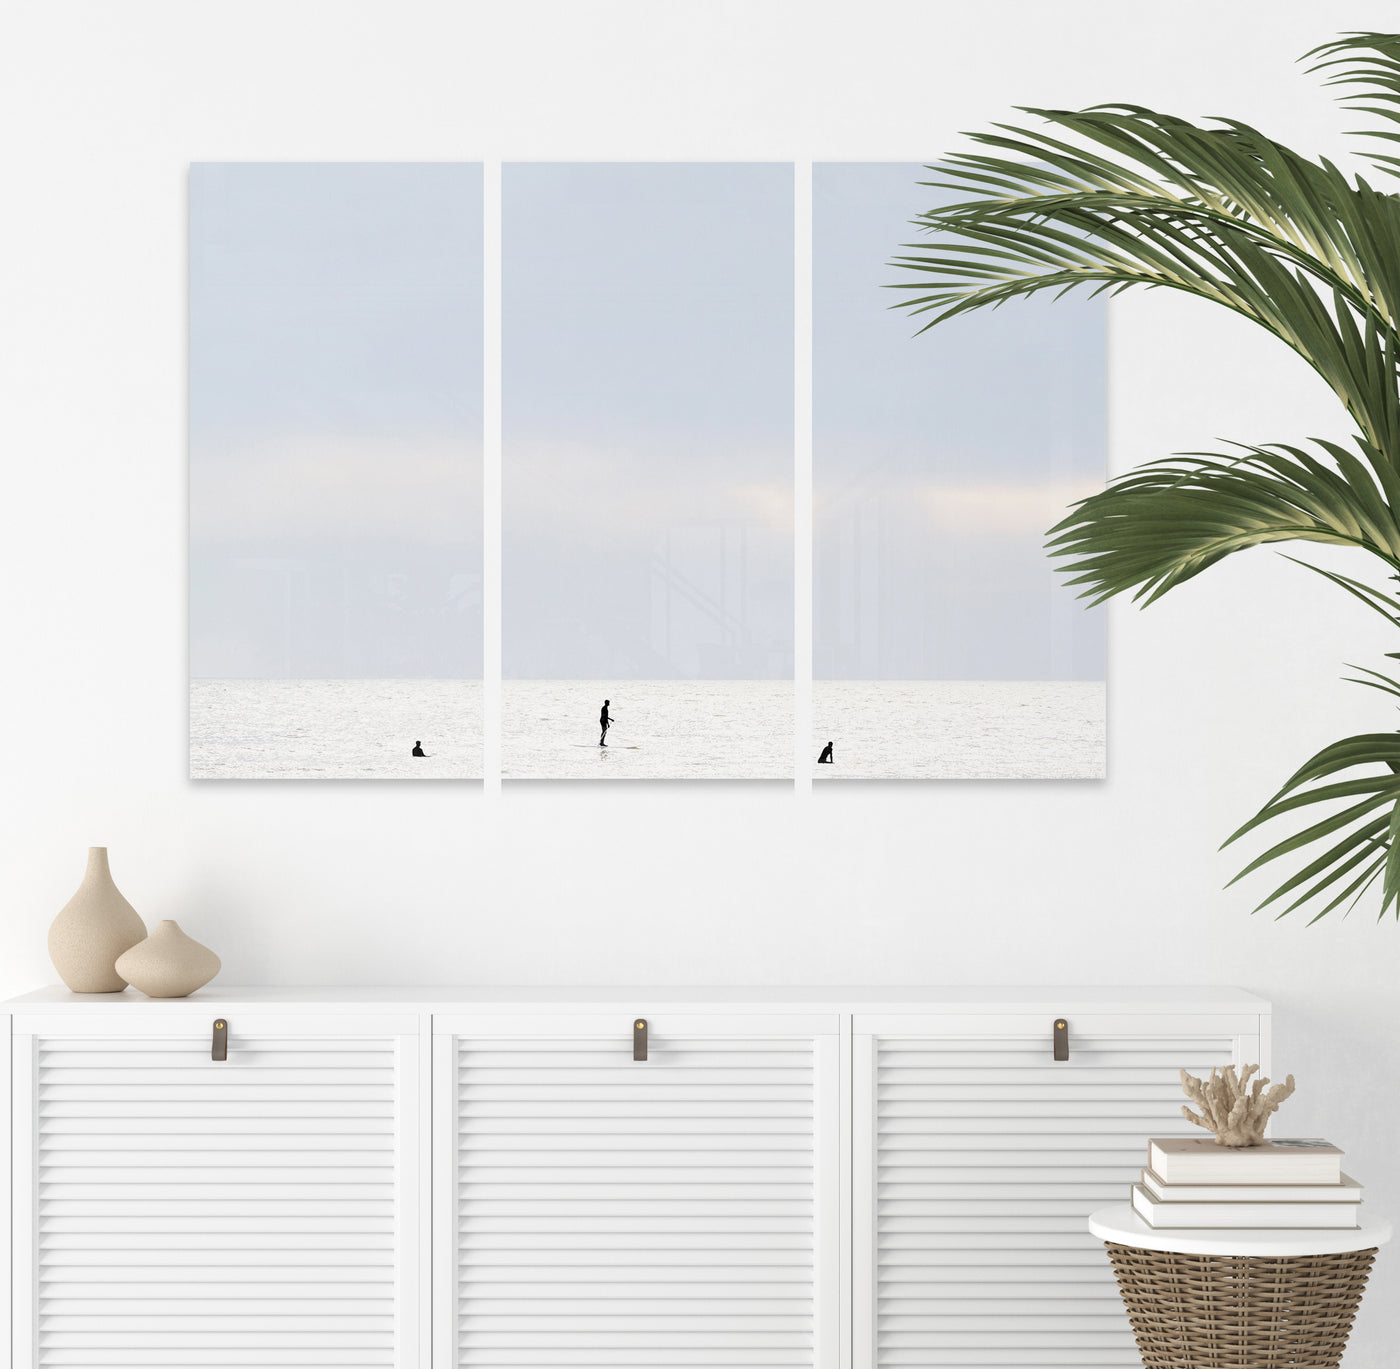 Surfing No 3 - Acrylic glass triptych art print by Cattie Coyle Photography above dresser